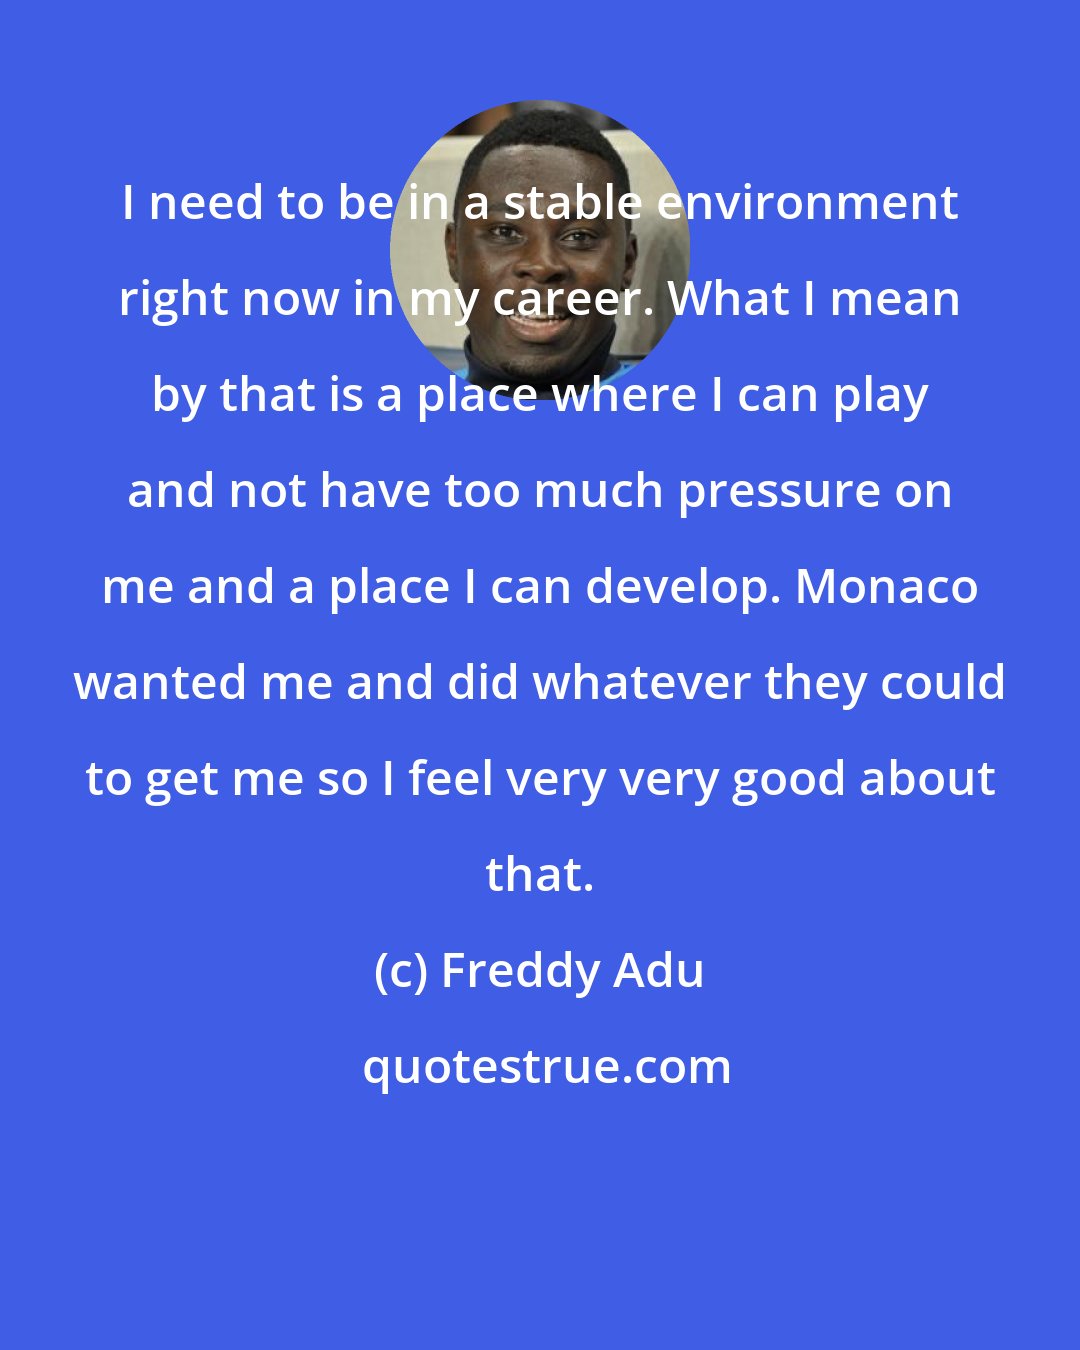 Freddy Adu: I need to be in a stable environment right now in my career. What I mean by that is a place where I can play and not have too much pressure on me and a place I can develop. Monaco wanted me and did whatever they could to get me so I feel very very good about that.